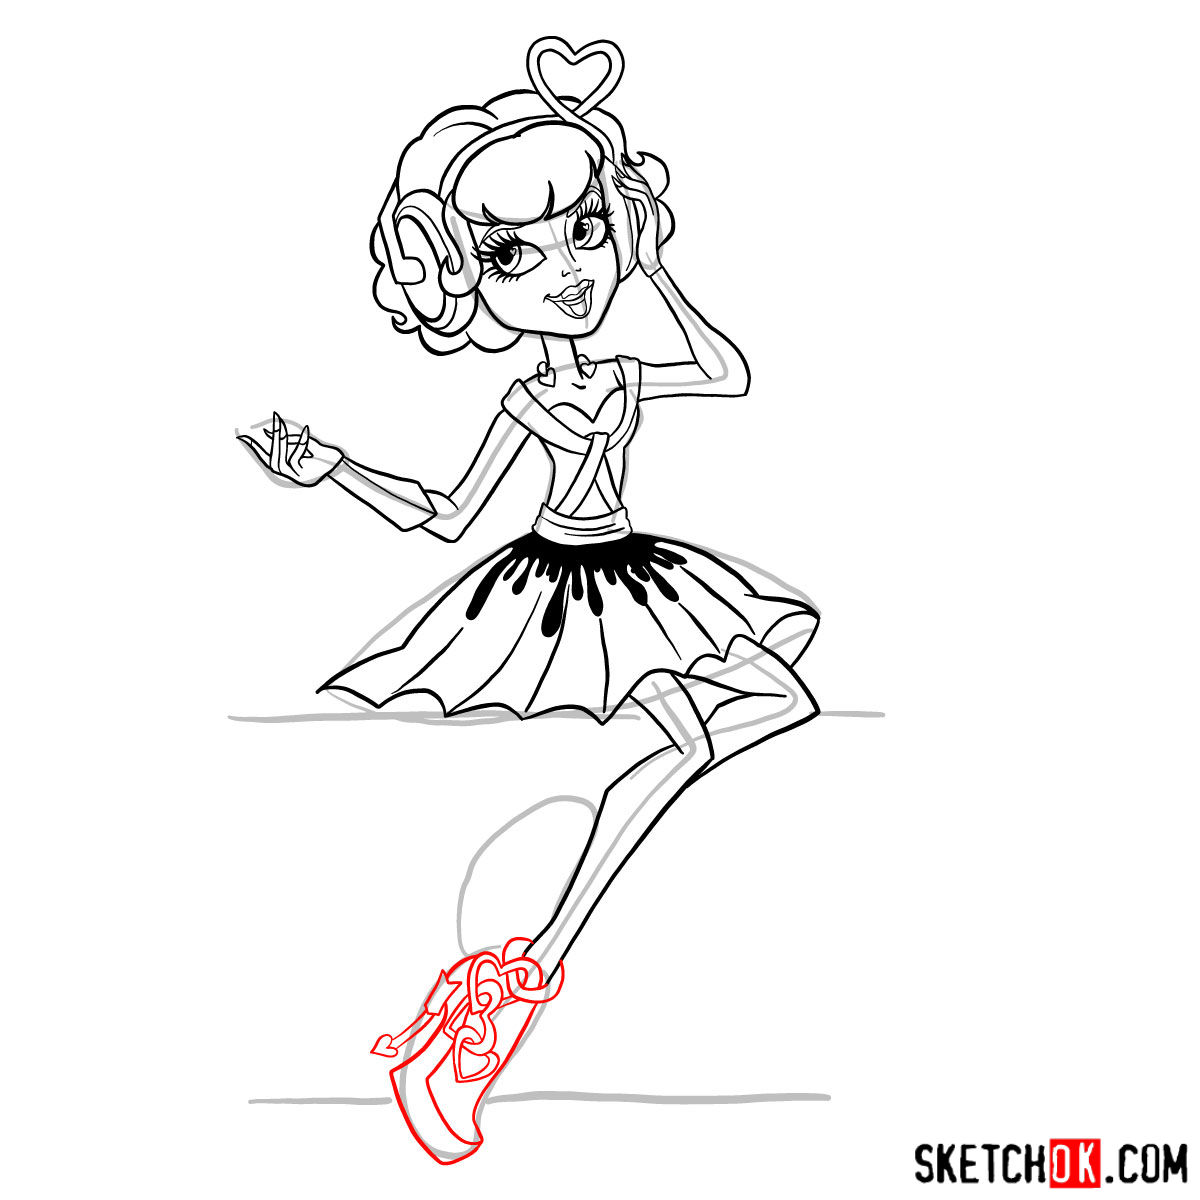 How to draw C.A. Cupid step by step - step 14